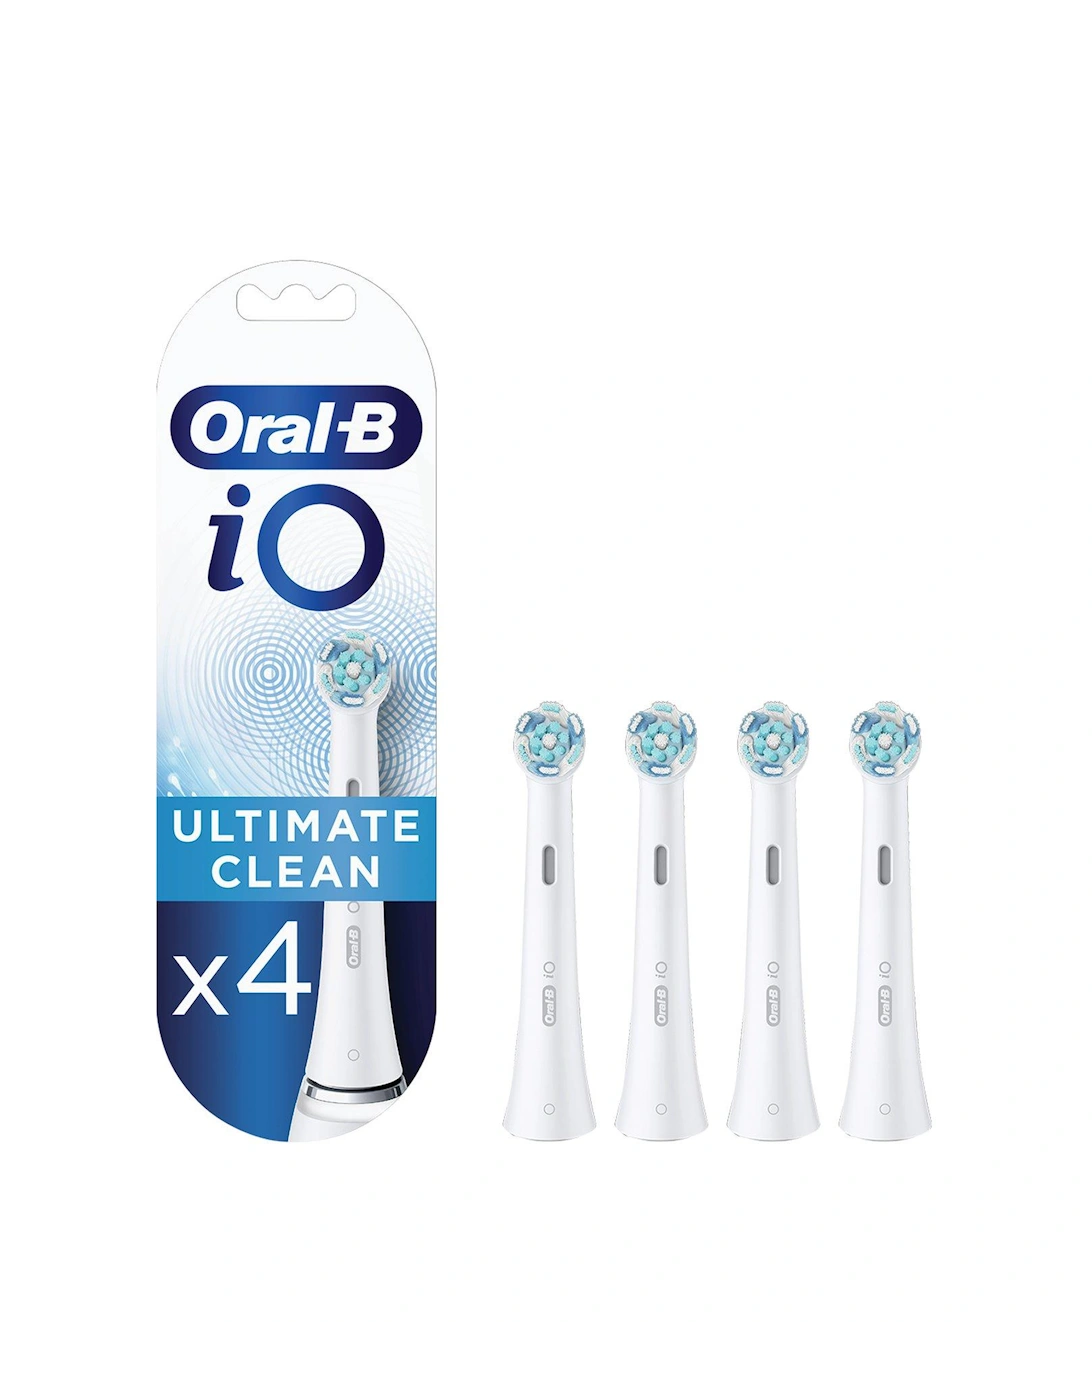 Oral-B iO Ultimate Clean White Refill Heads - Pack of 4, 2 of 1